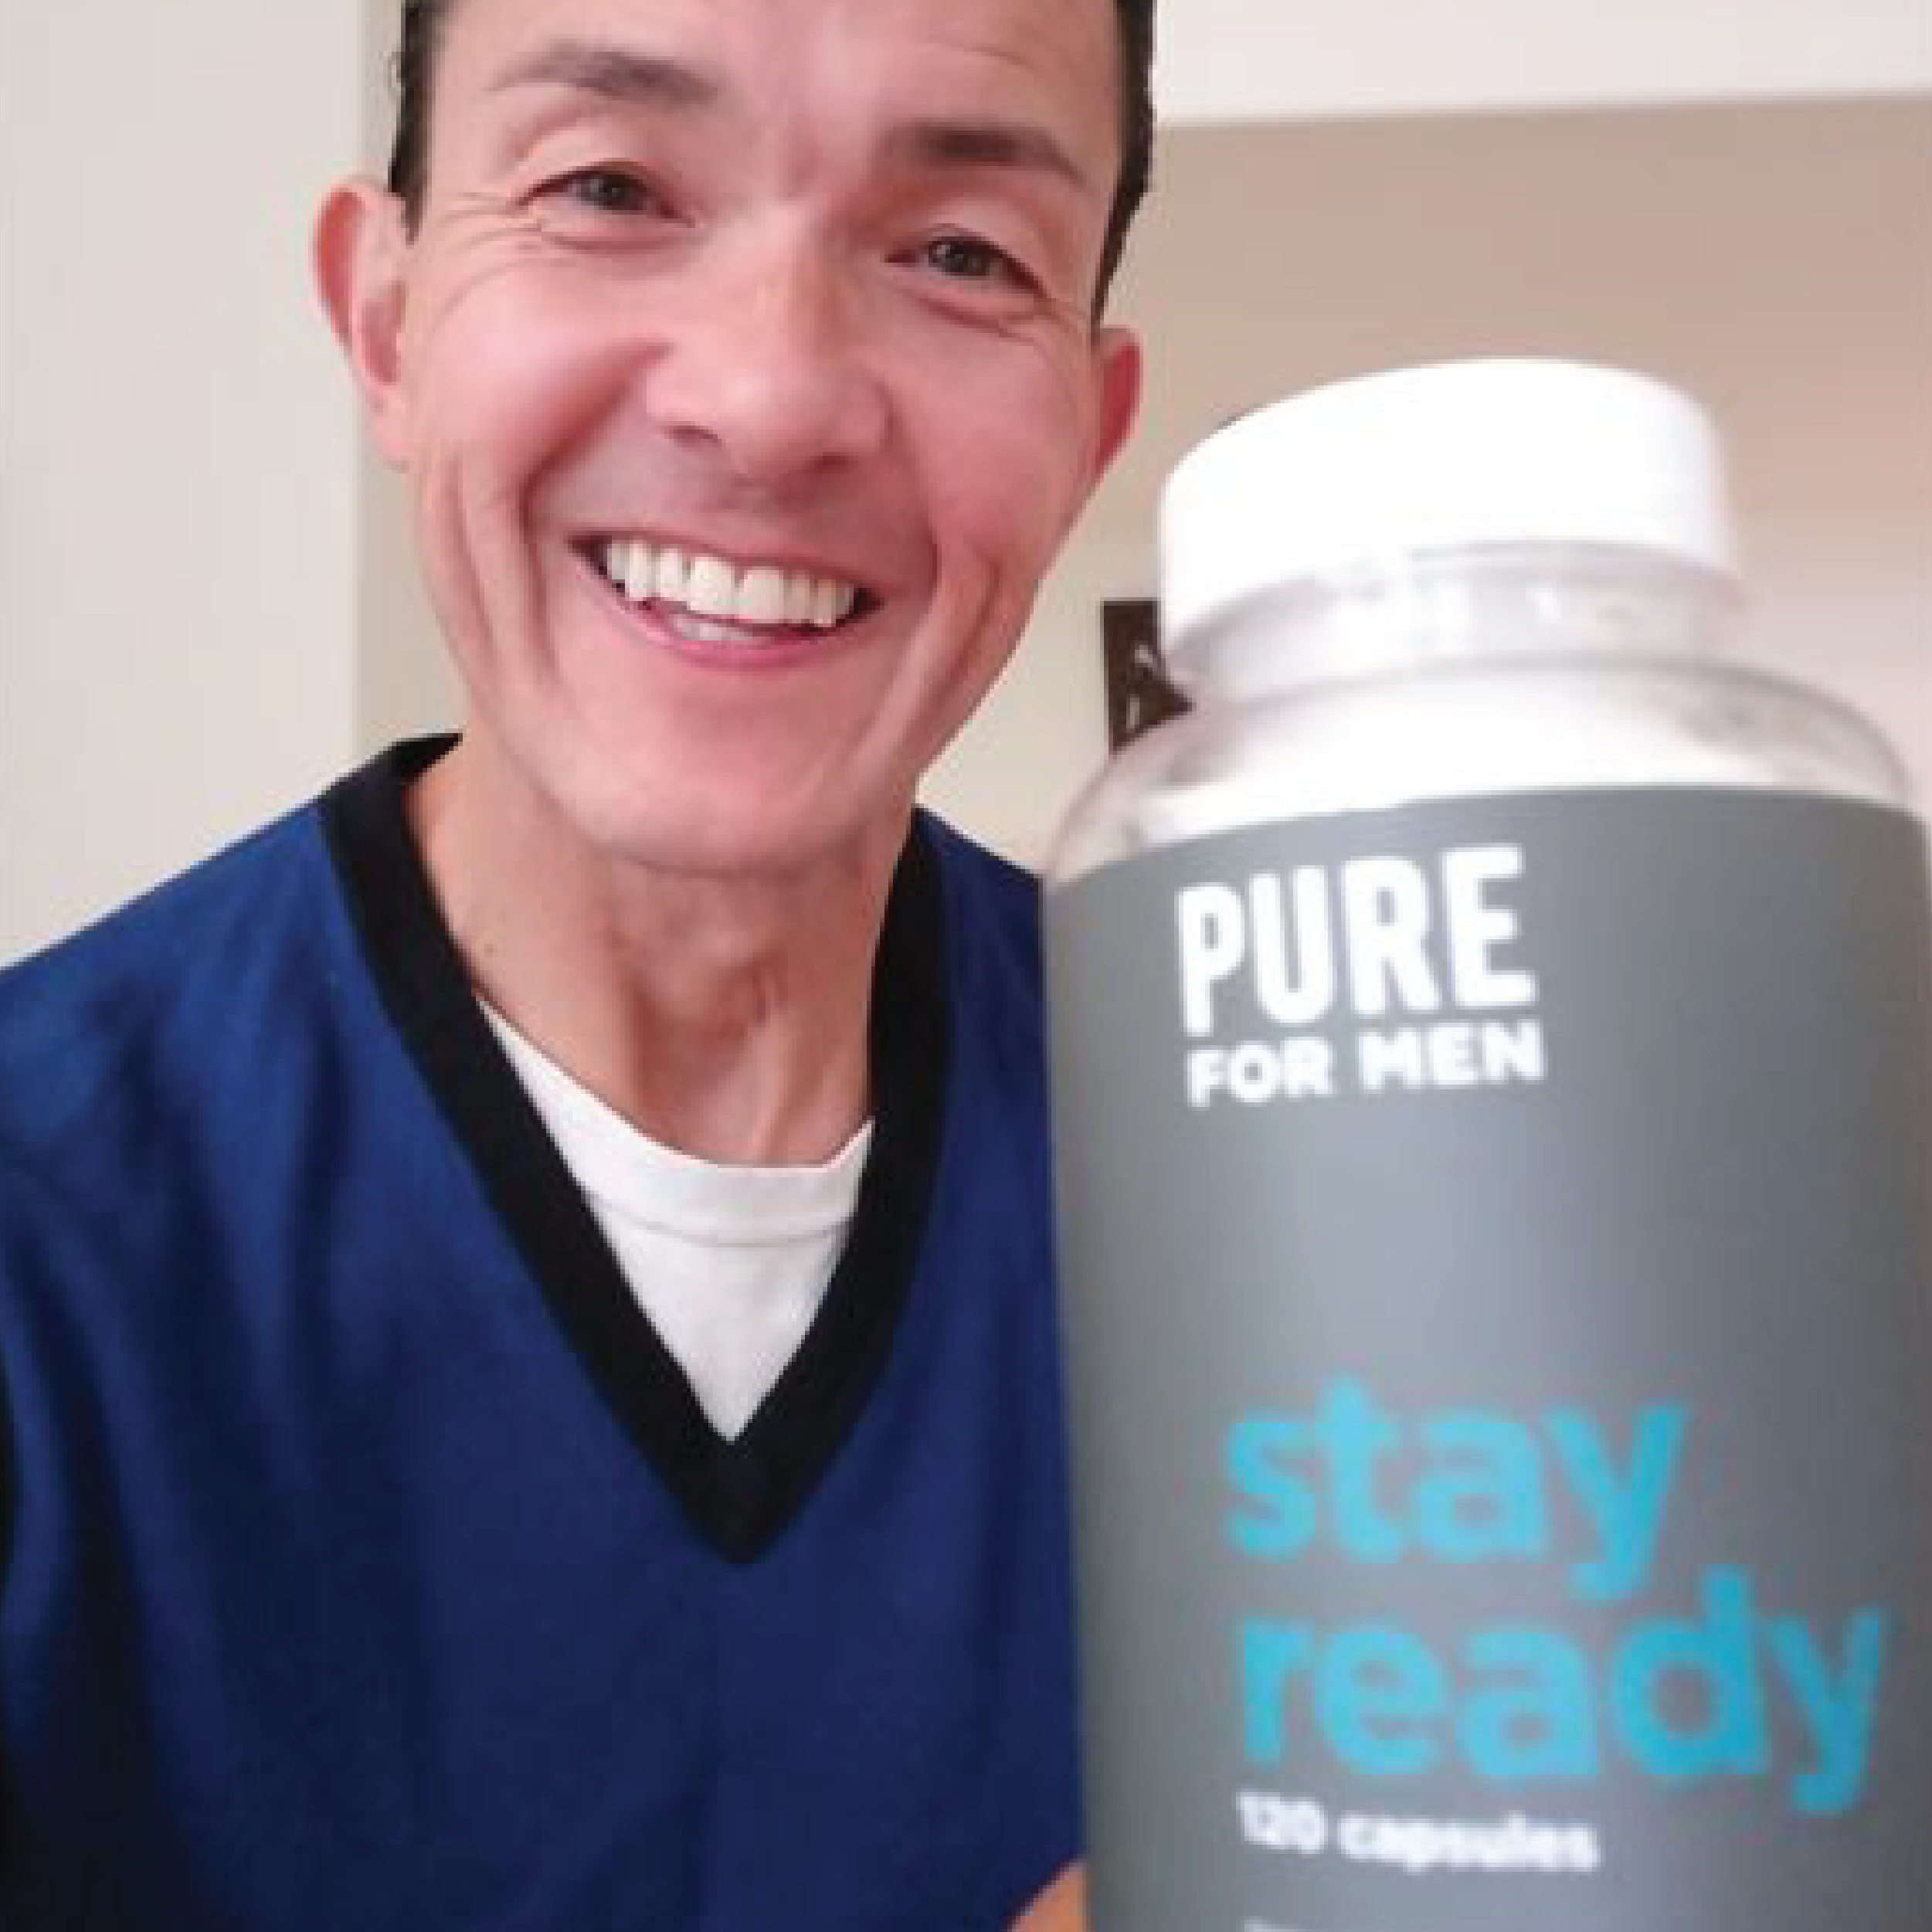 Pure for Men 5 Star Review Customer Testimonial Peter Stay Ready Fiber 